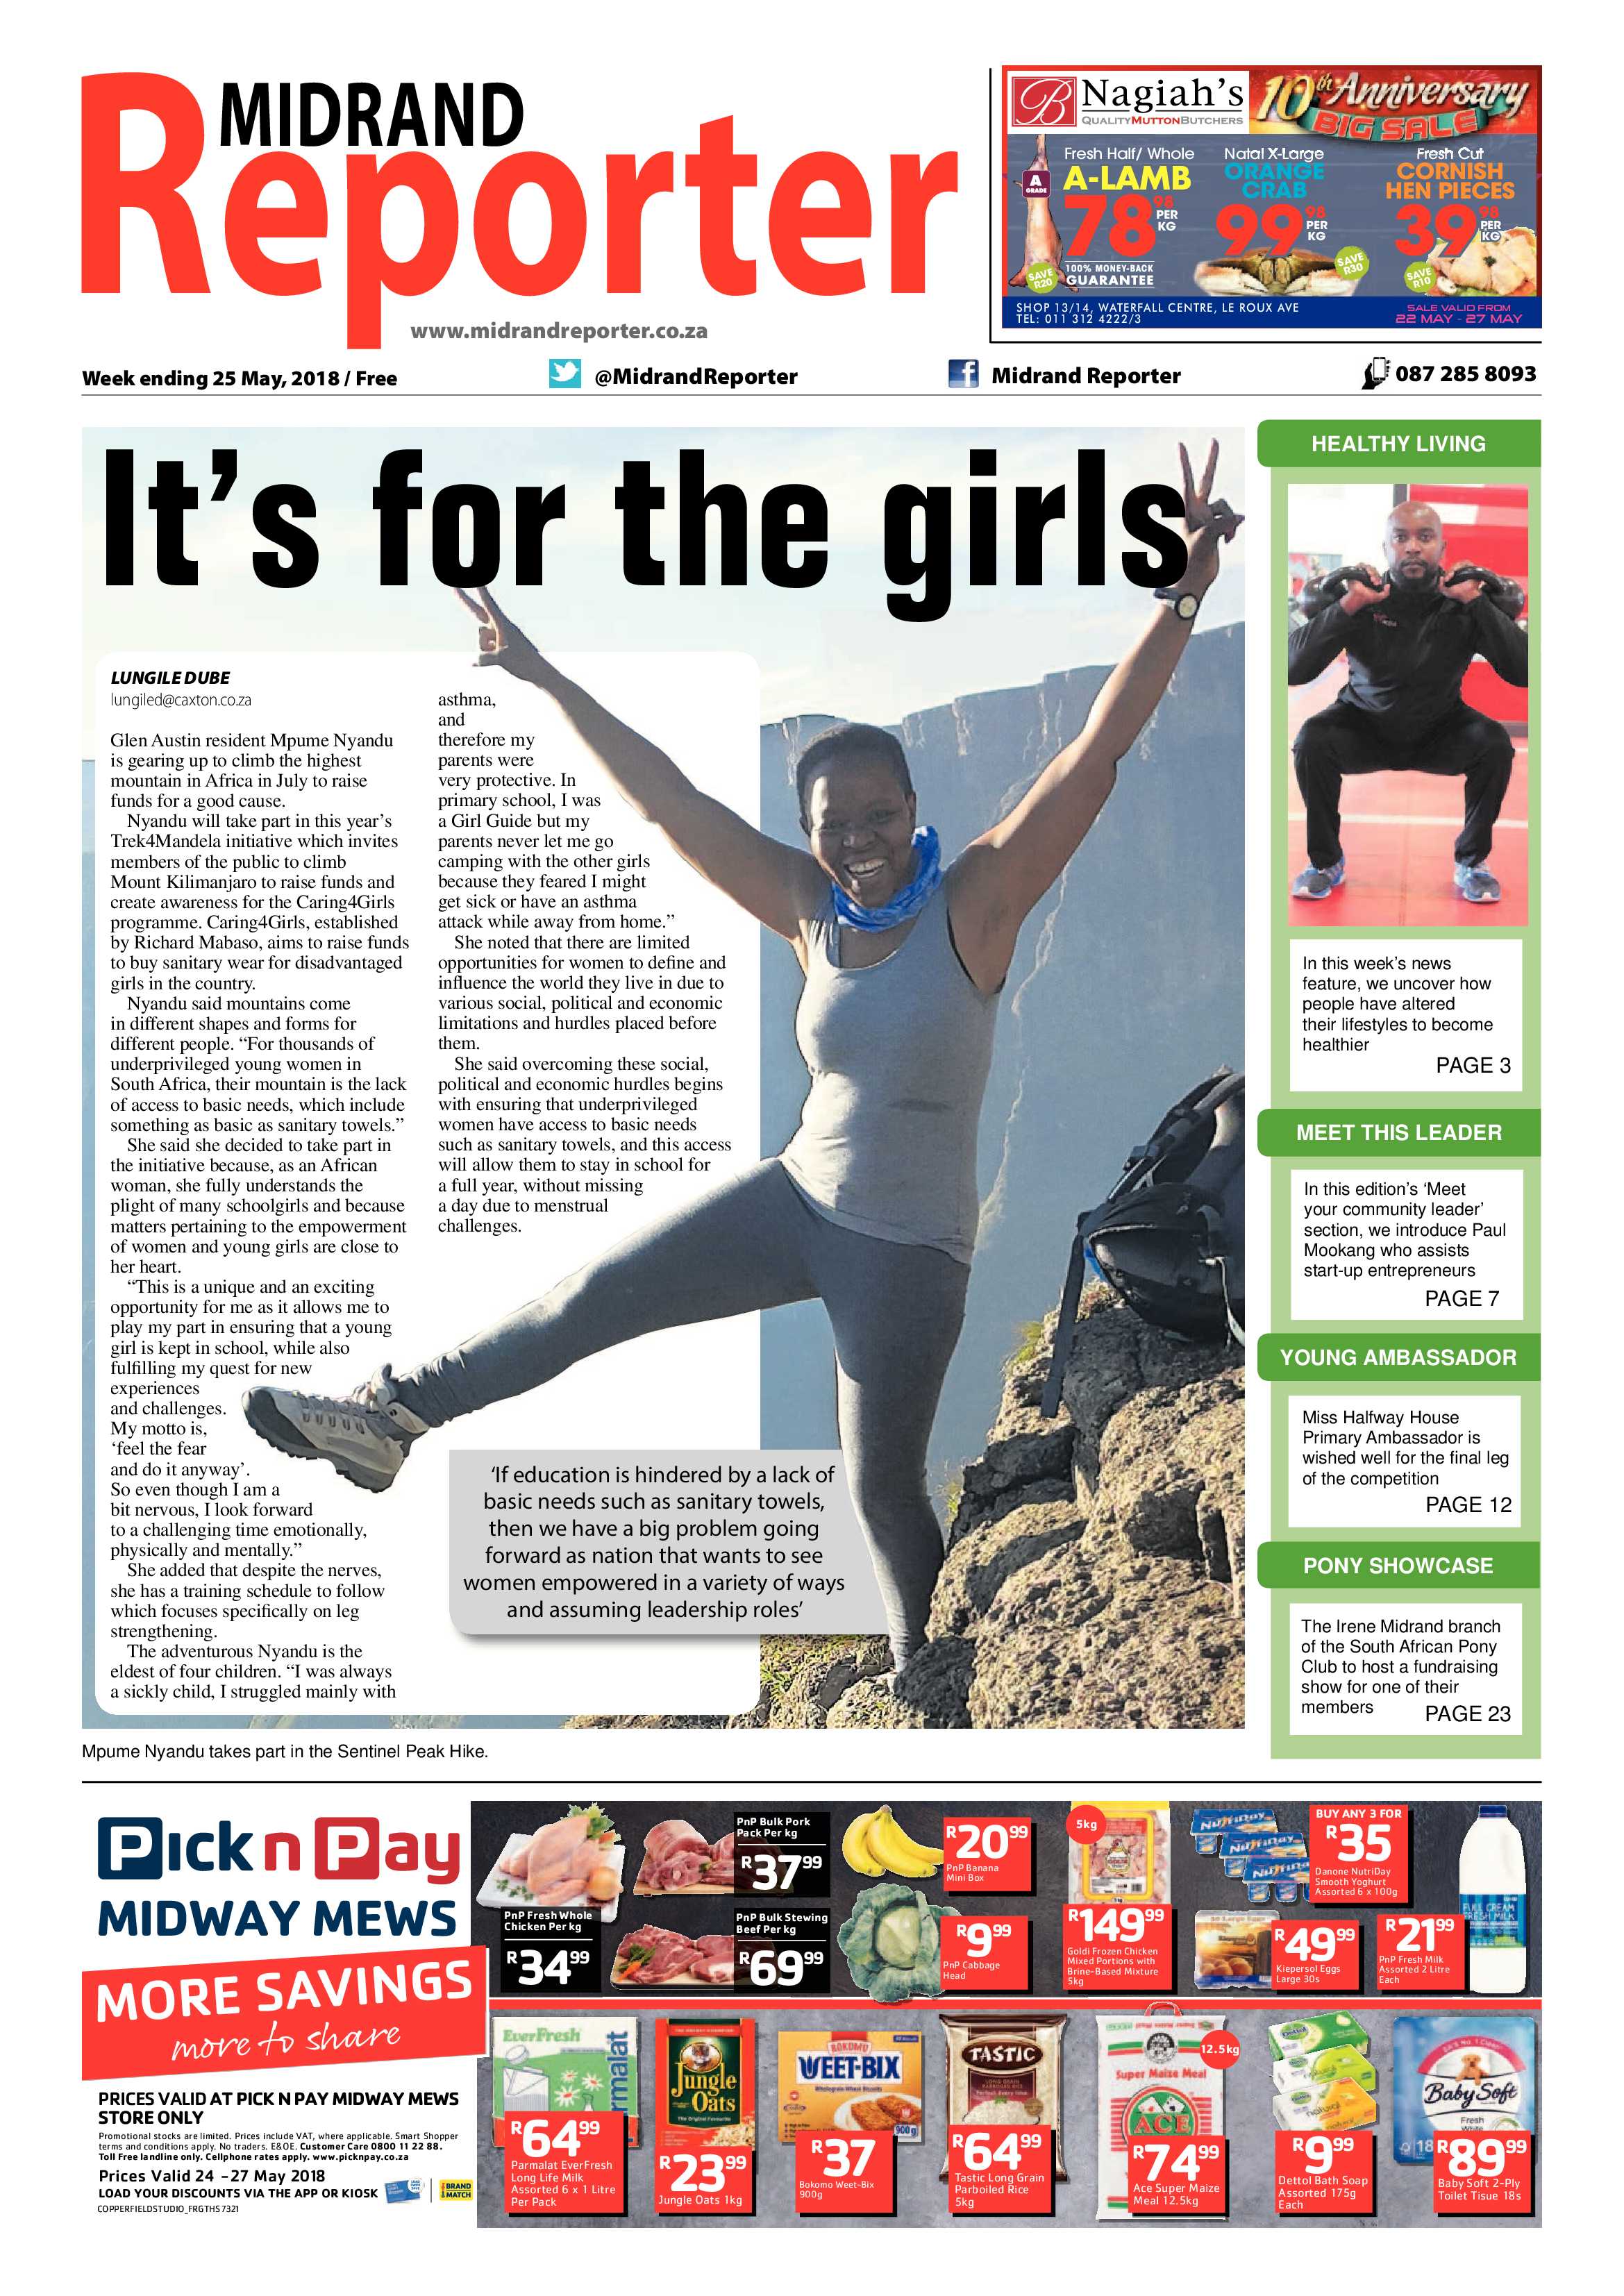 Midrand Reporter 25 May 2018 page 1